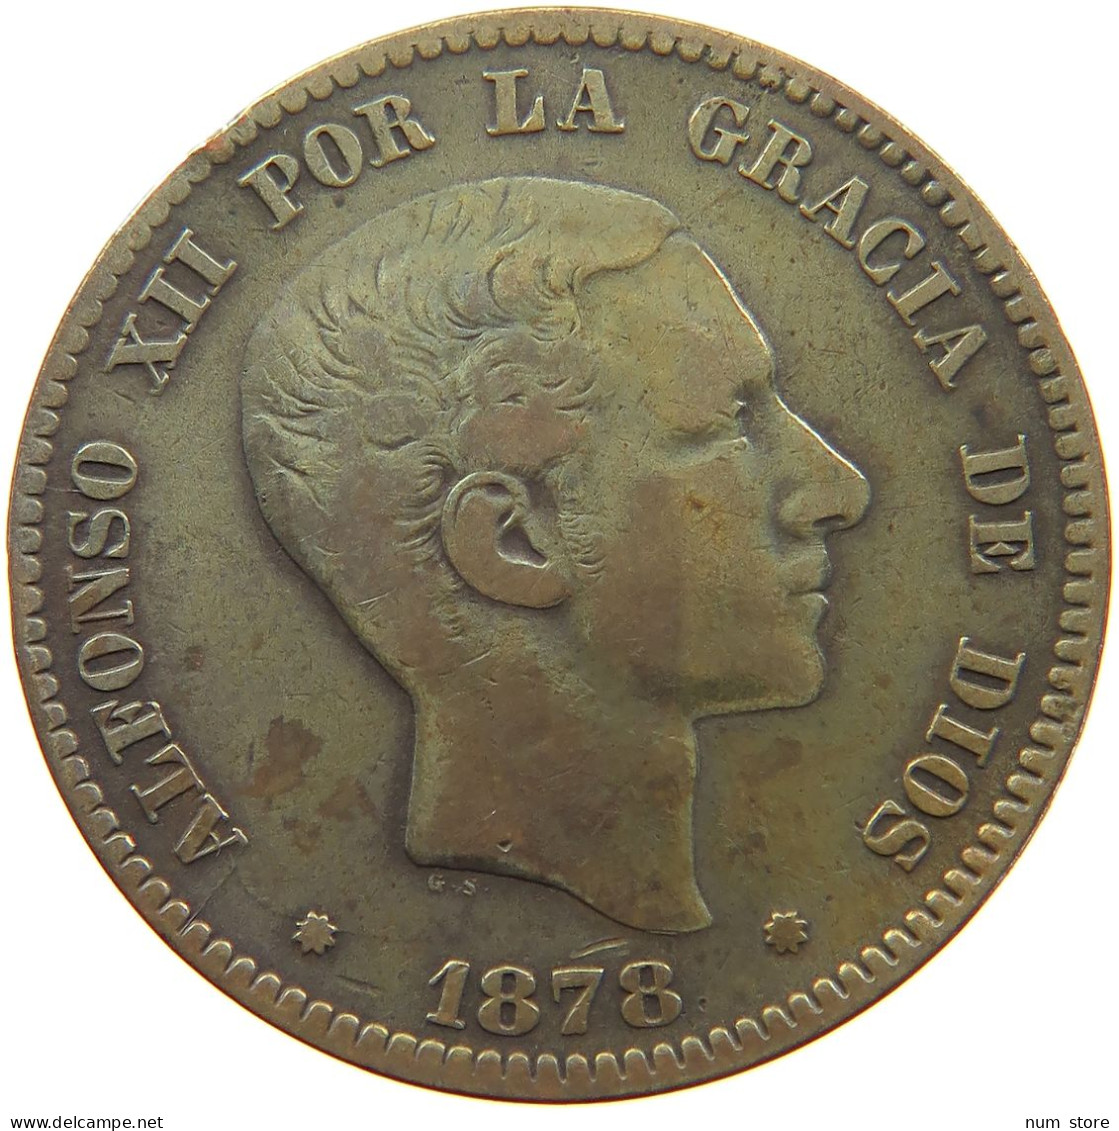 SPAIN 10 CENTIMOS 1878 ALFONSO XII. (1874 - 1885) #MA 065657 - First Minting